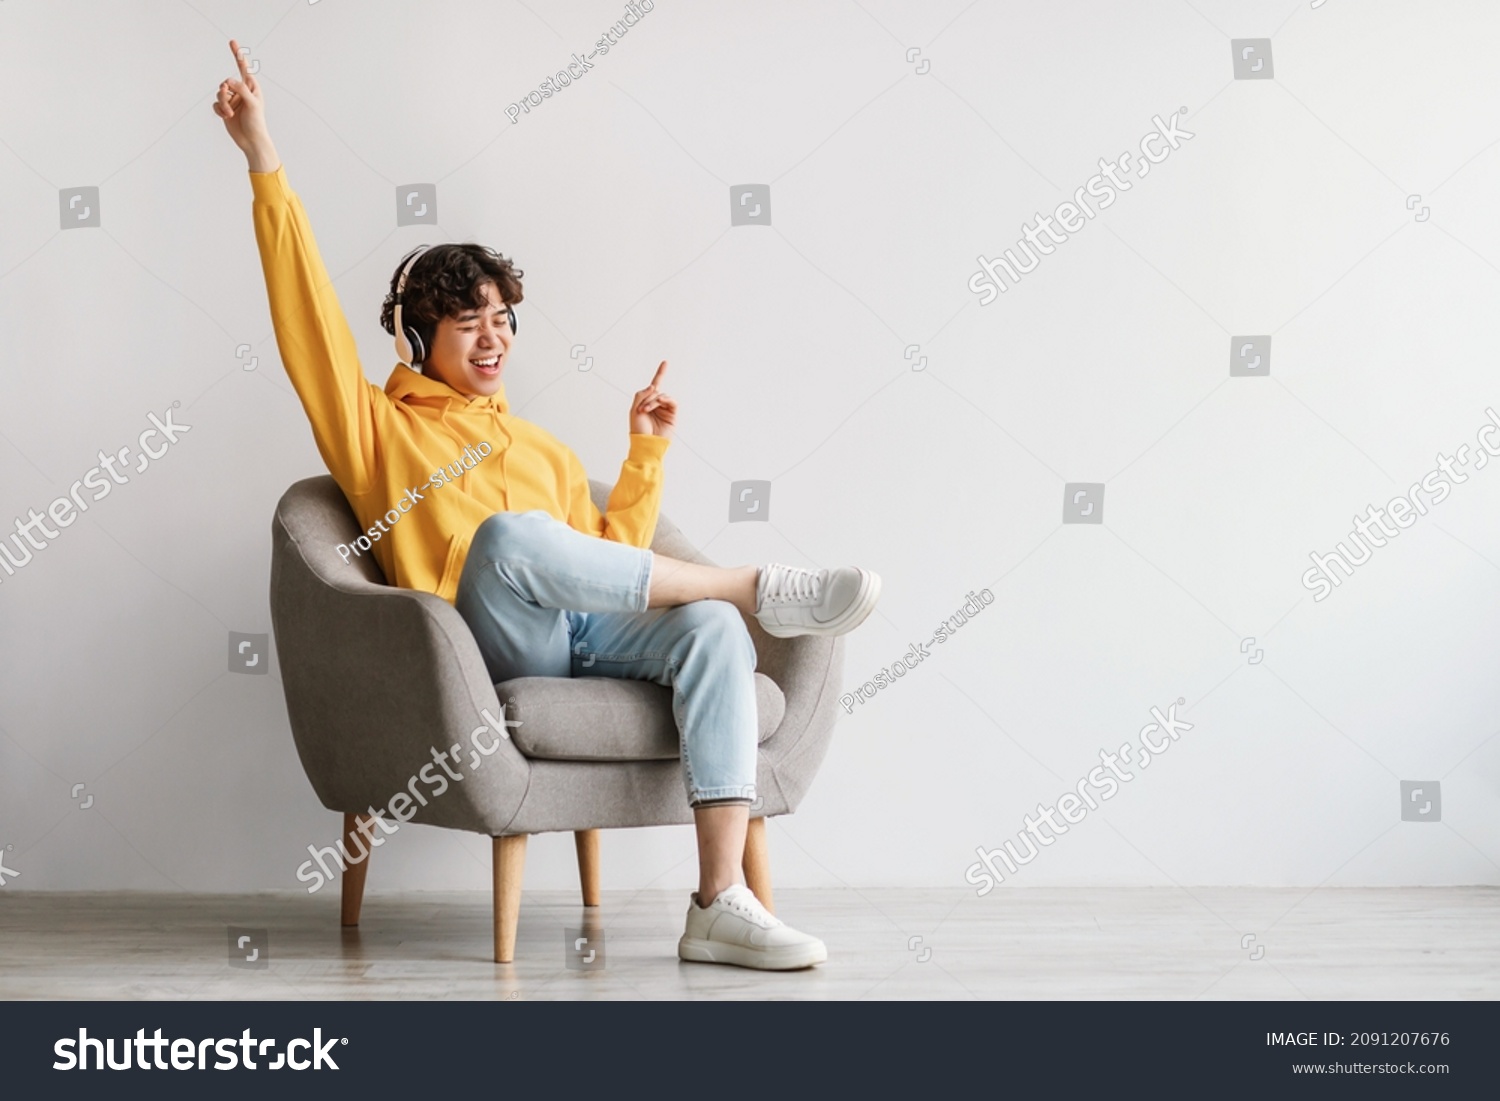 Joyful young Asian guy in wireless headphones sitting in armchair, having fun, listening to music, raising his arm, dancing to favorite song, enjoying cool soundtrack against white wall, empty space #2091207676